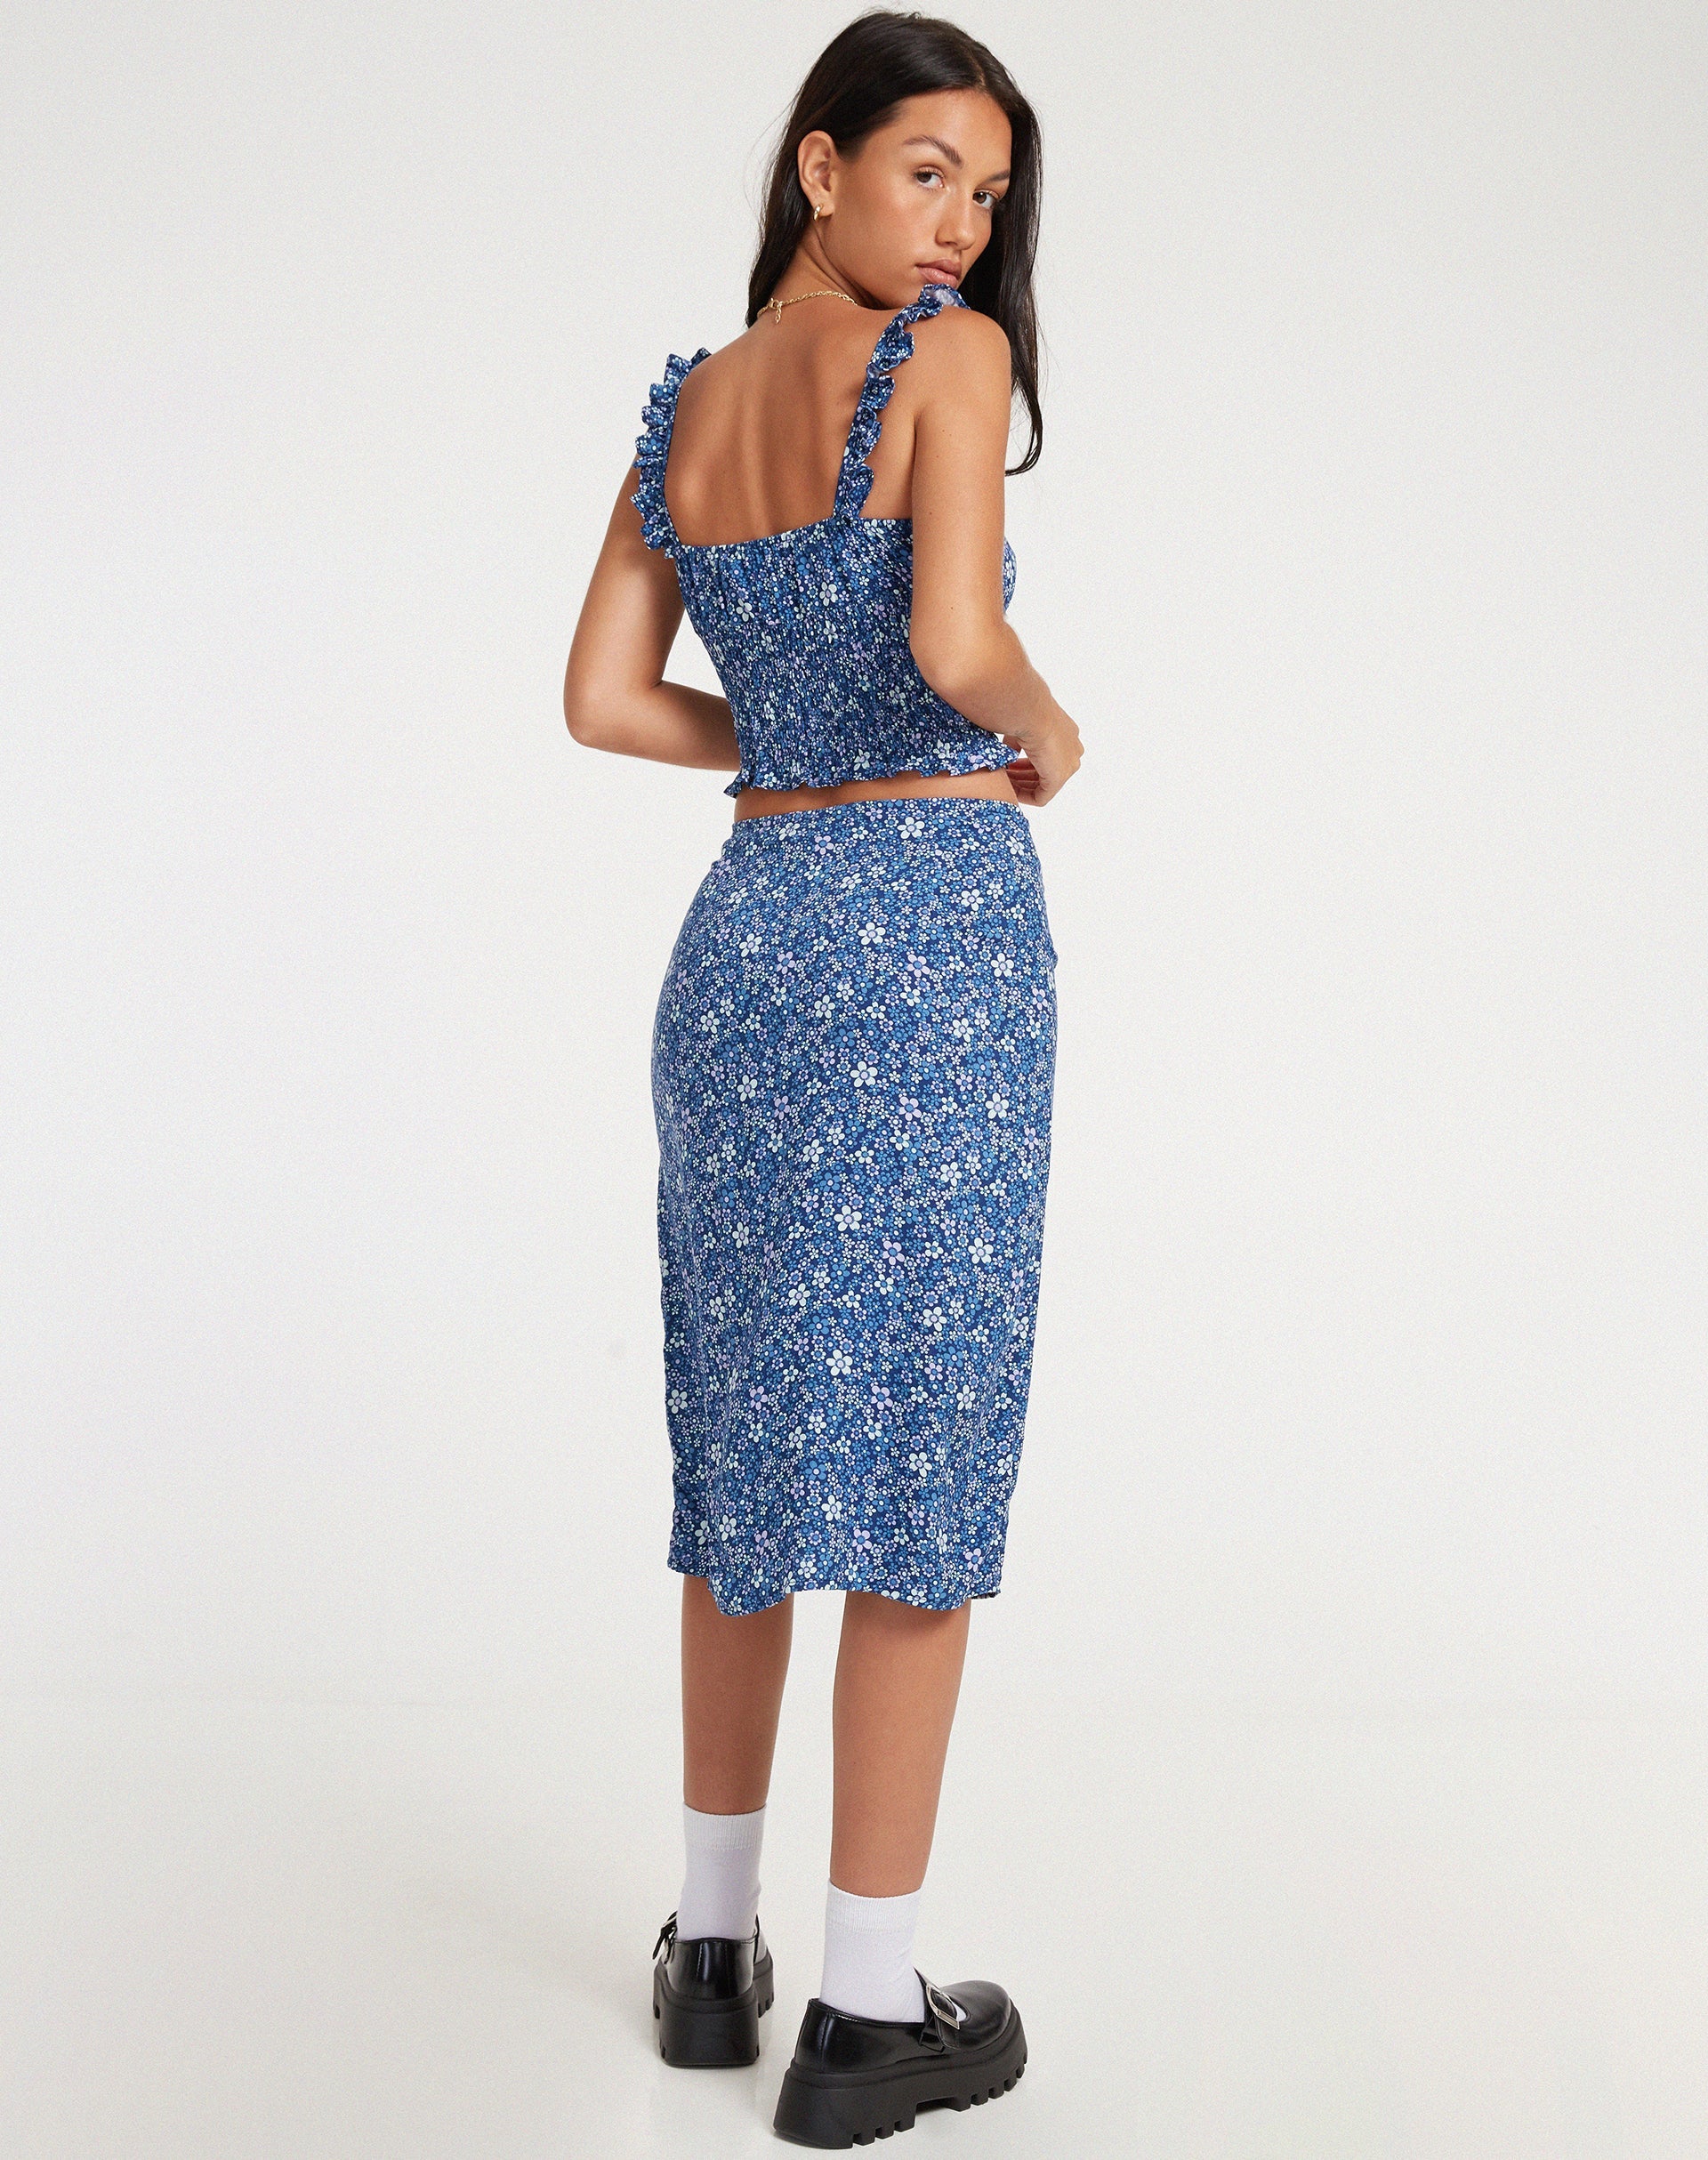 image of Harriet Midi Skirt in Retro Floral Blue